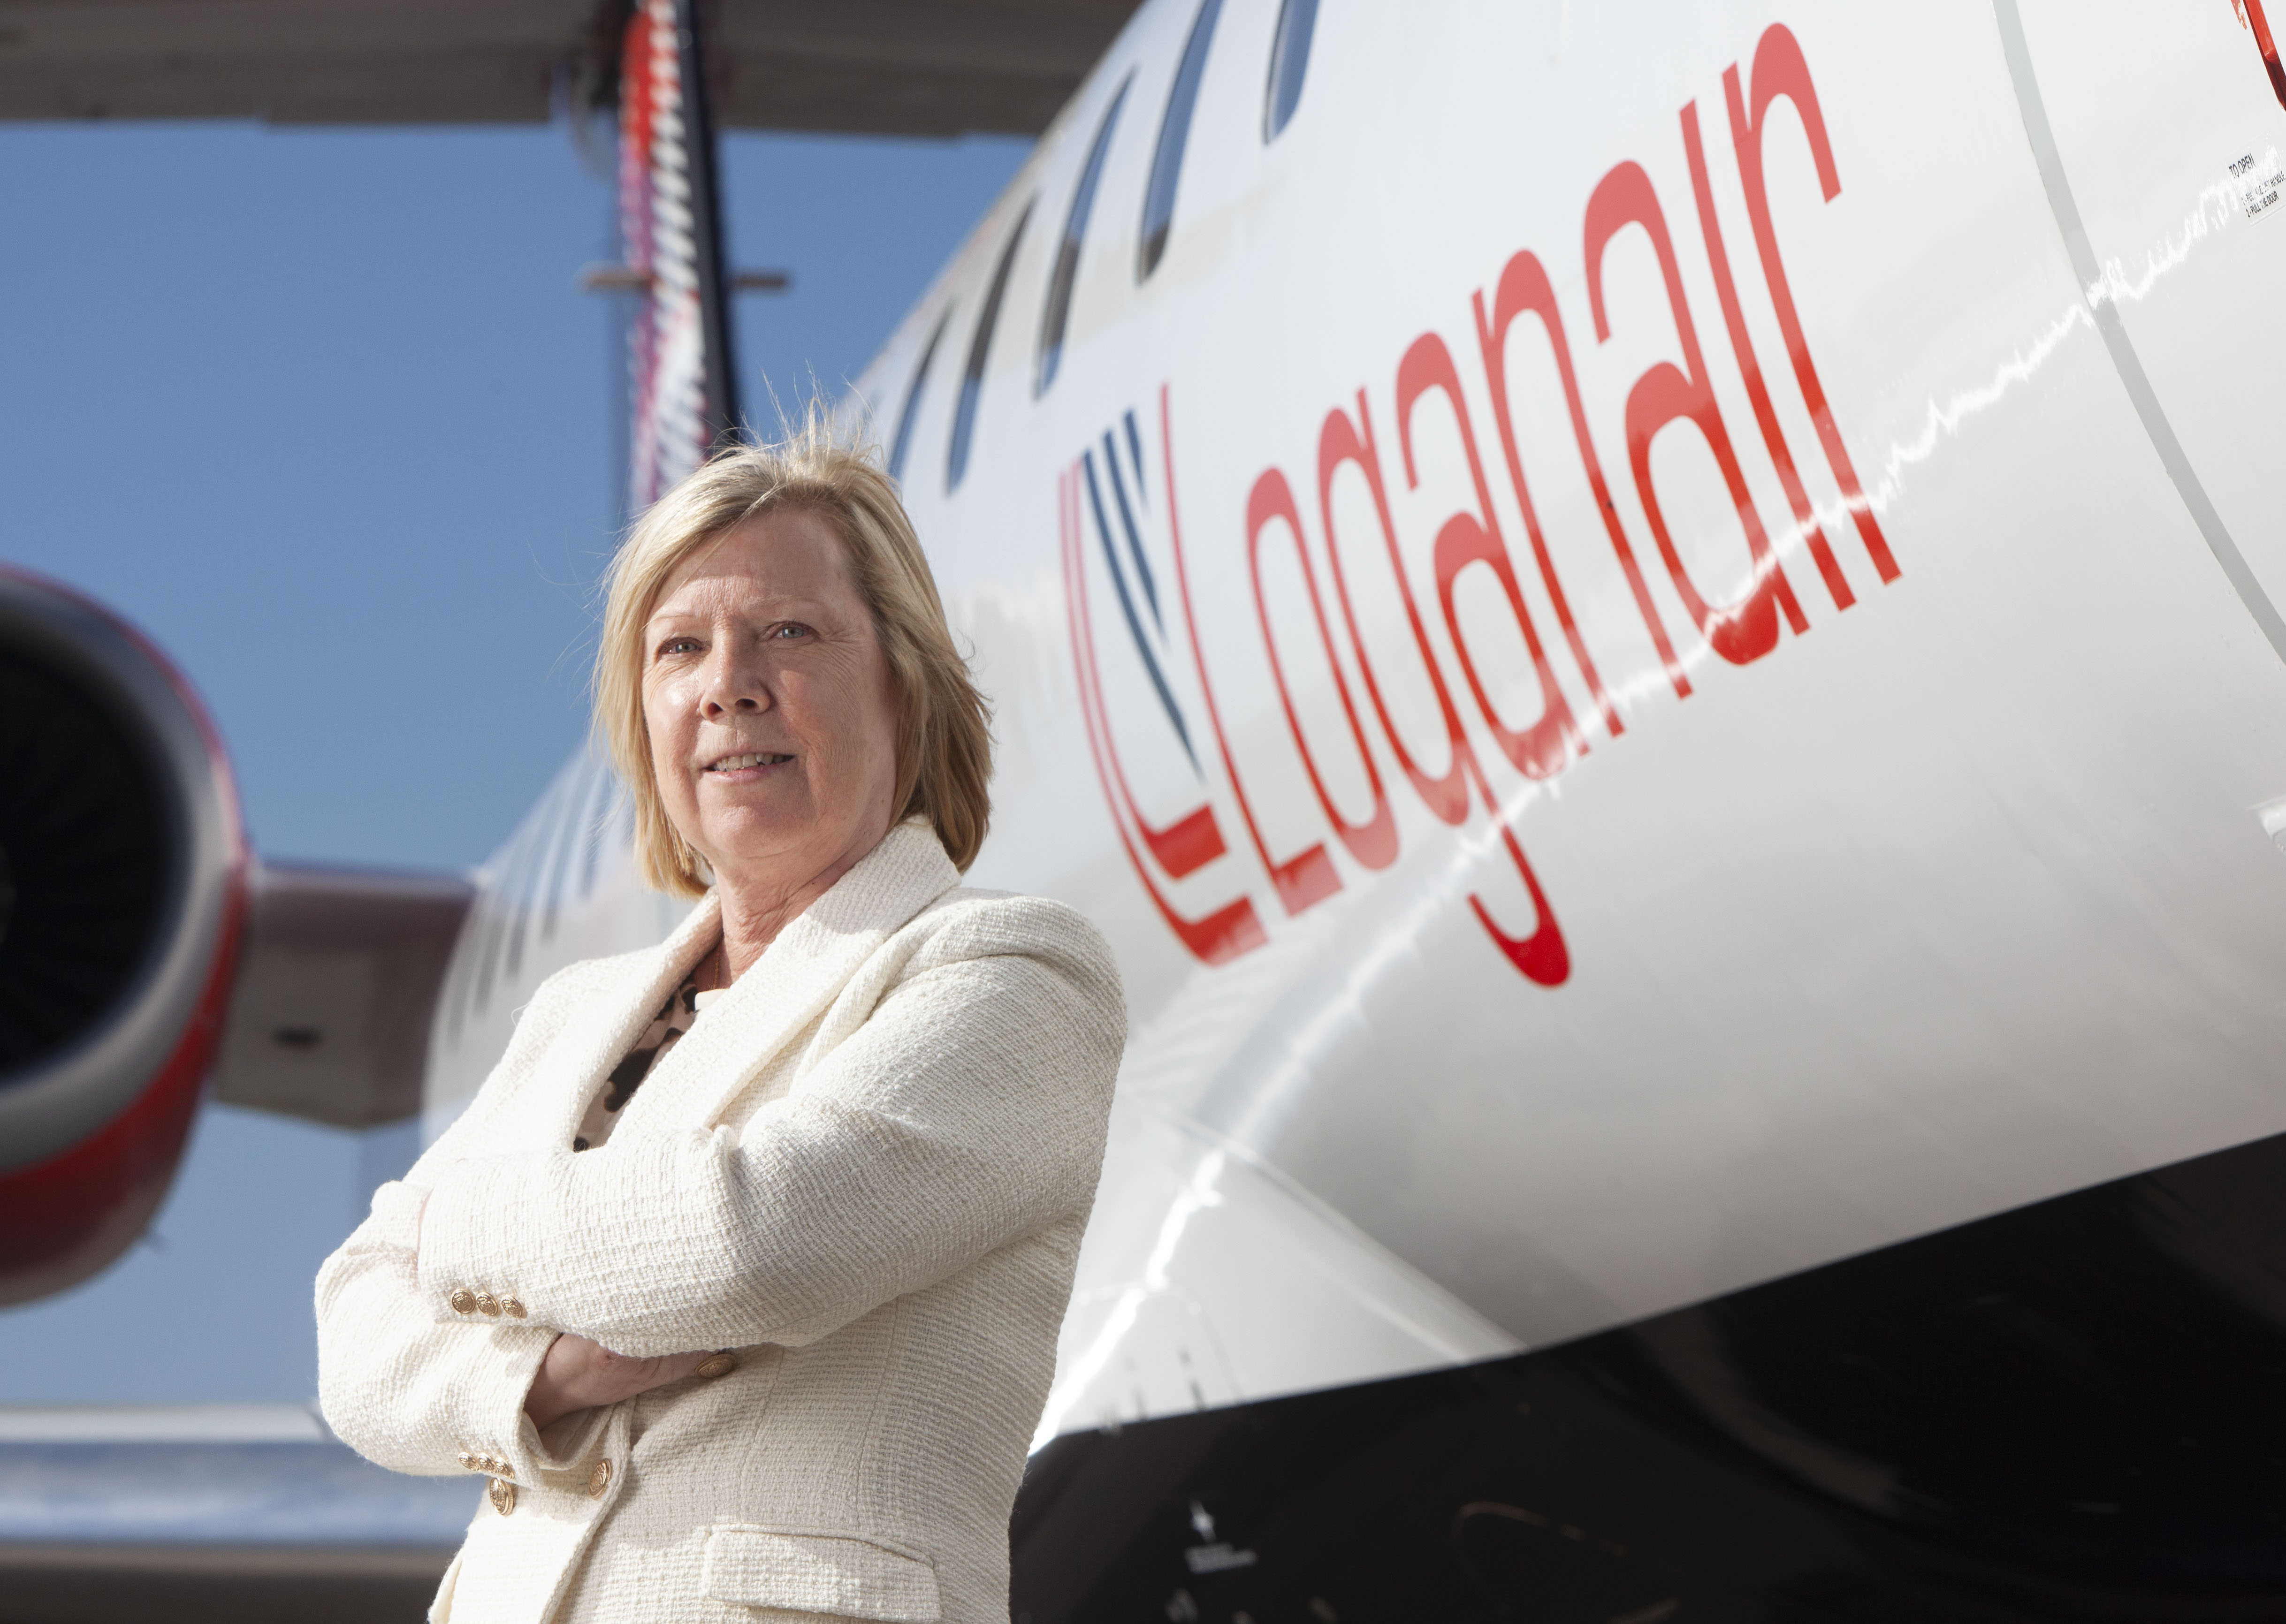 Loganair announces biggest ever winter schedule with a 50% increase in seats